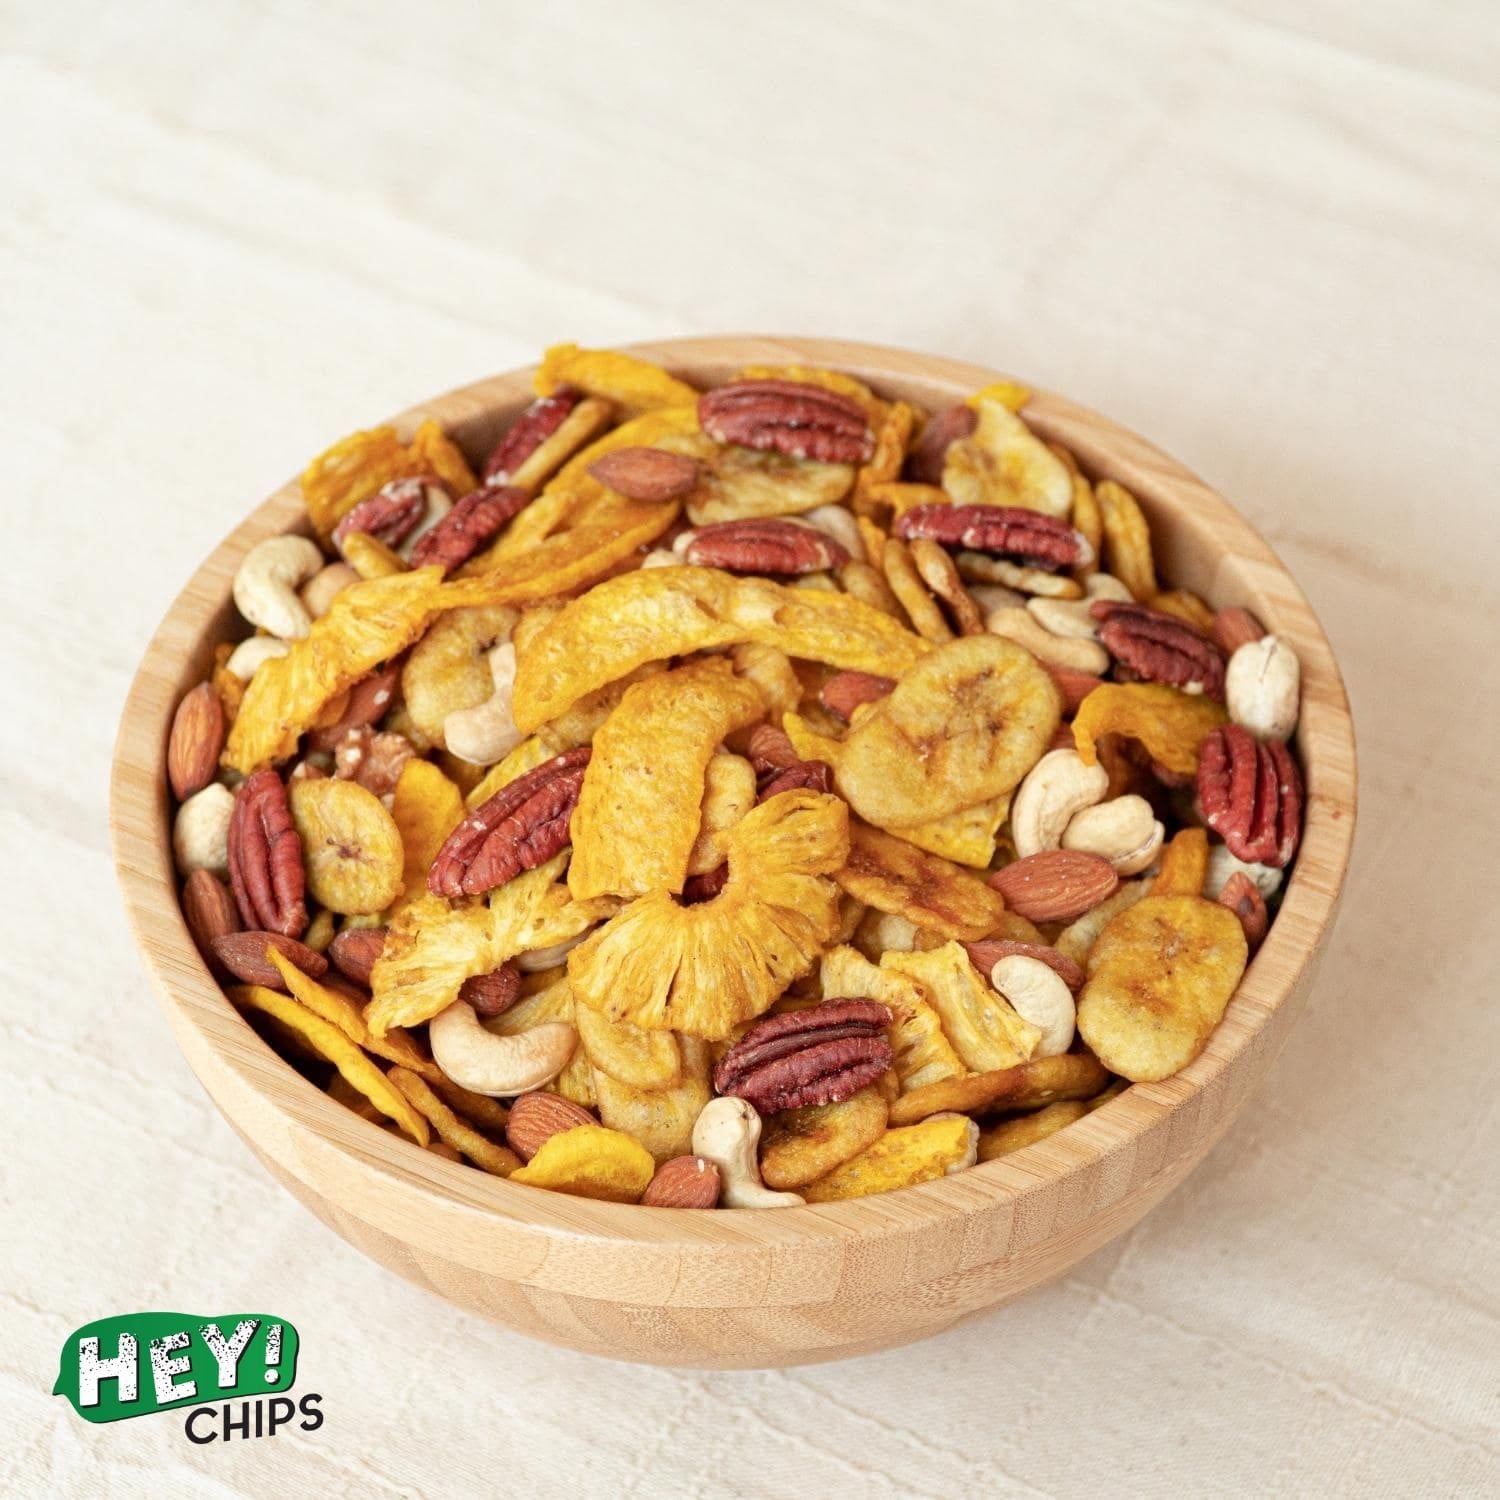 Fruits and Nuts (140g)